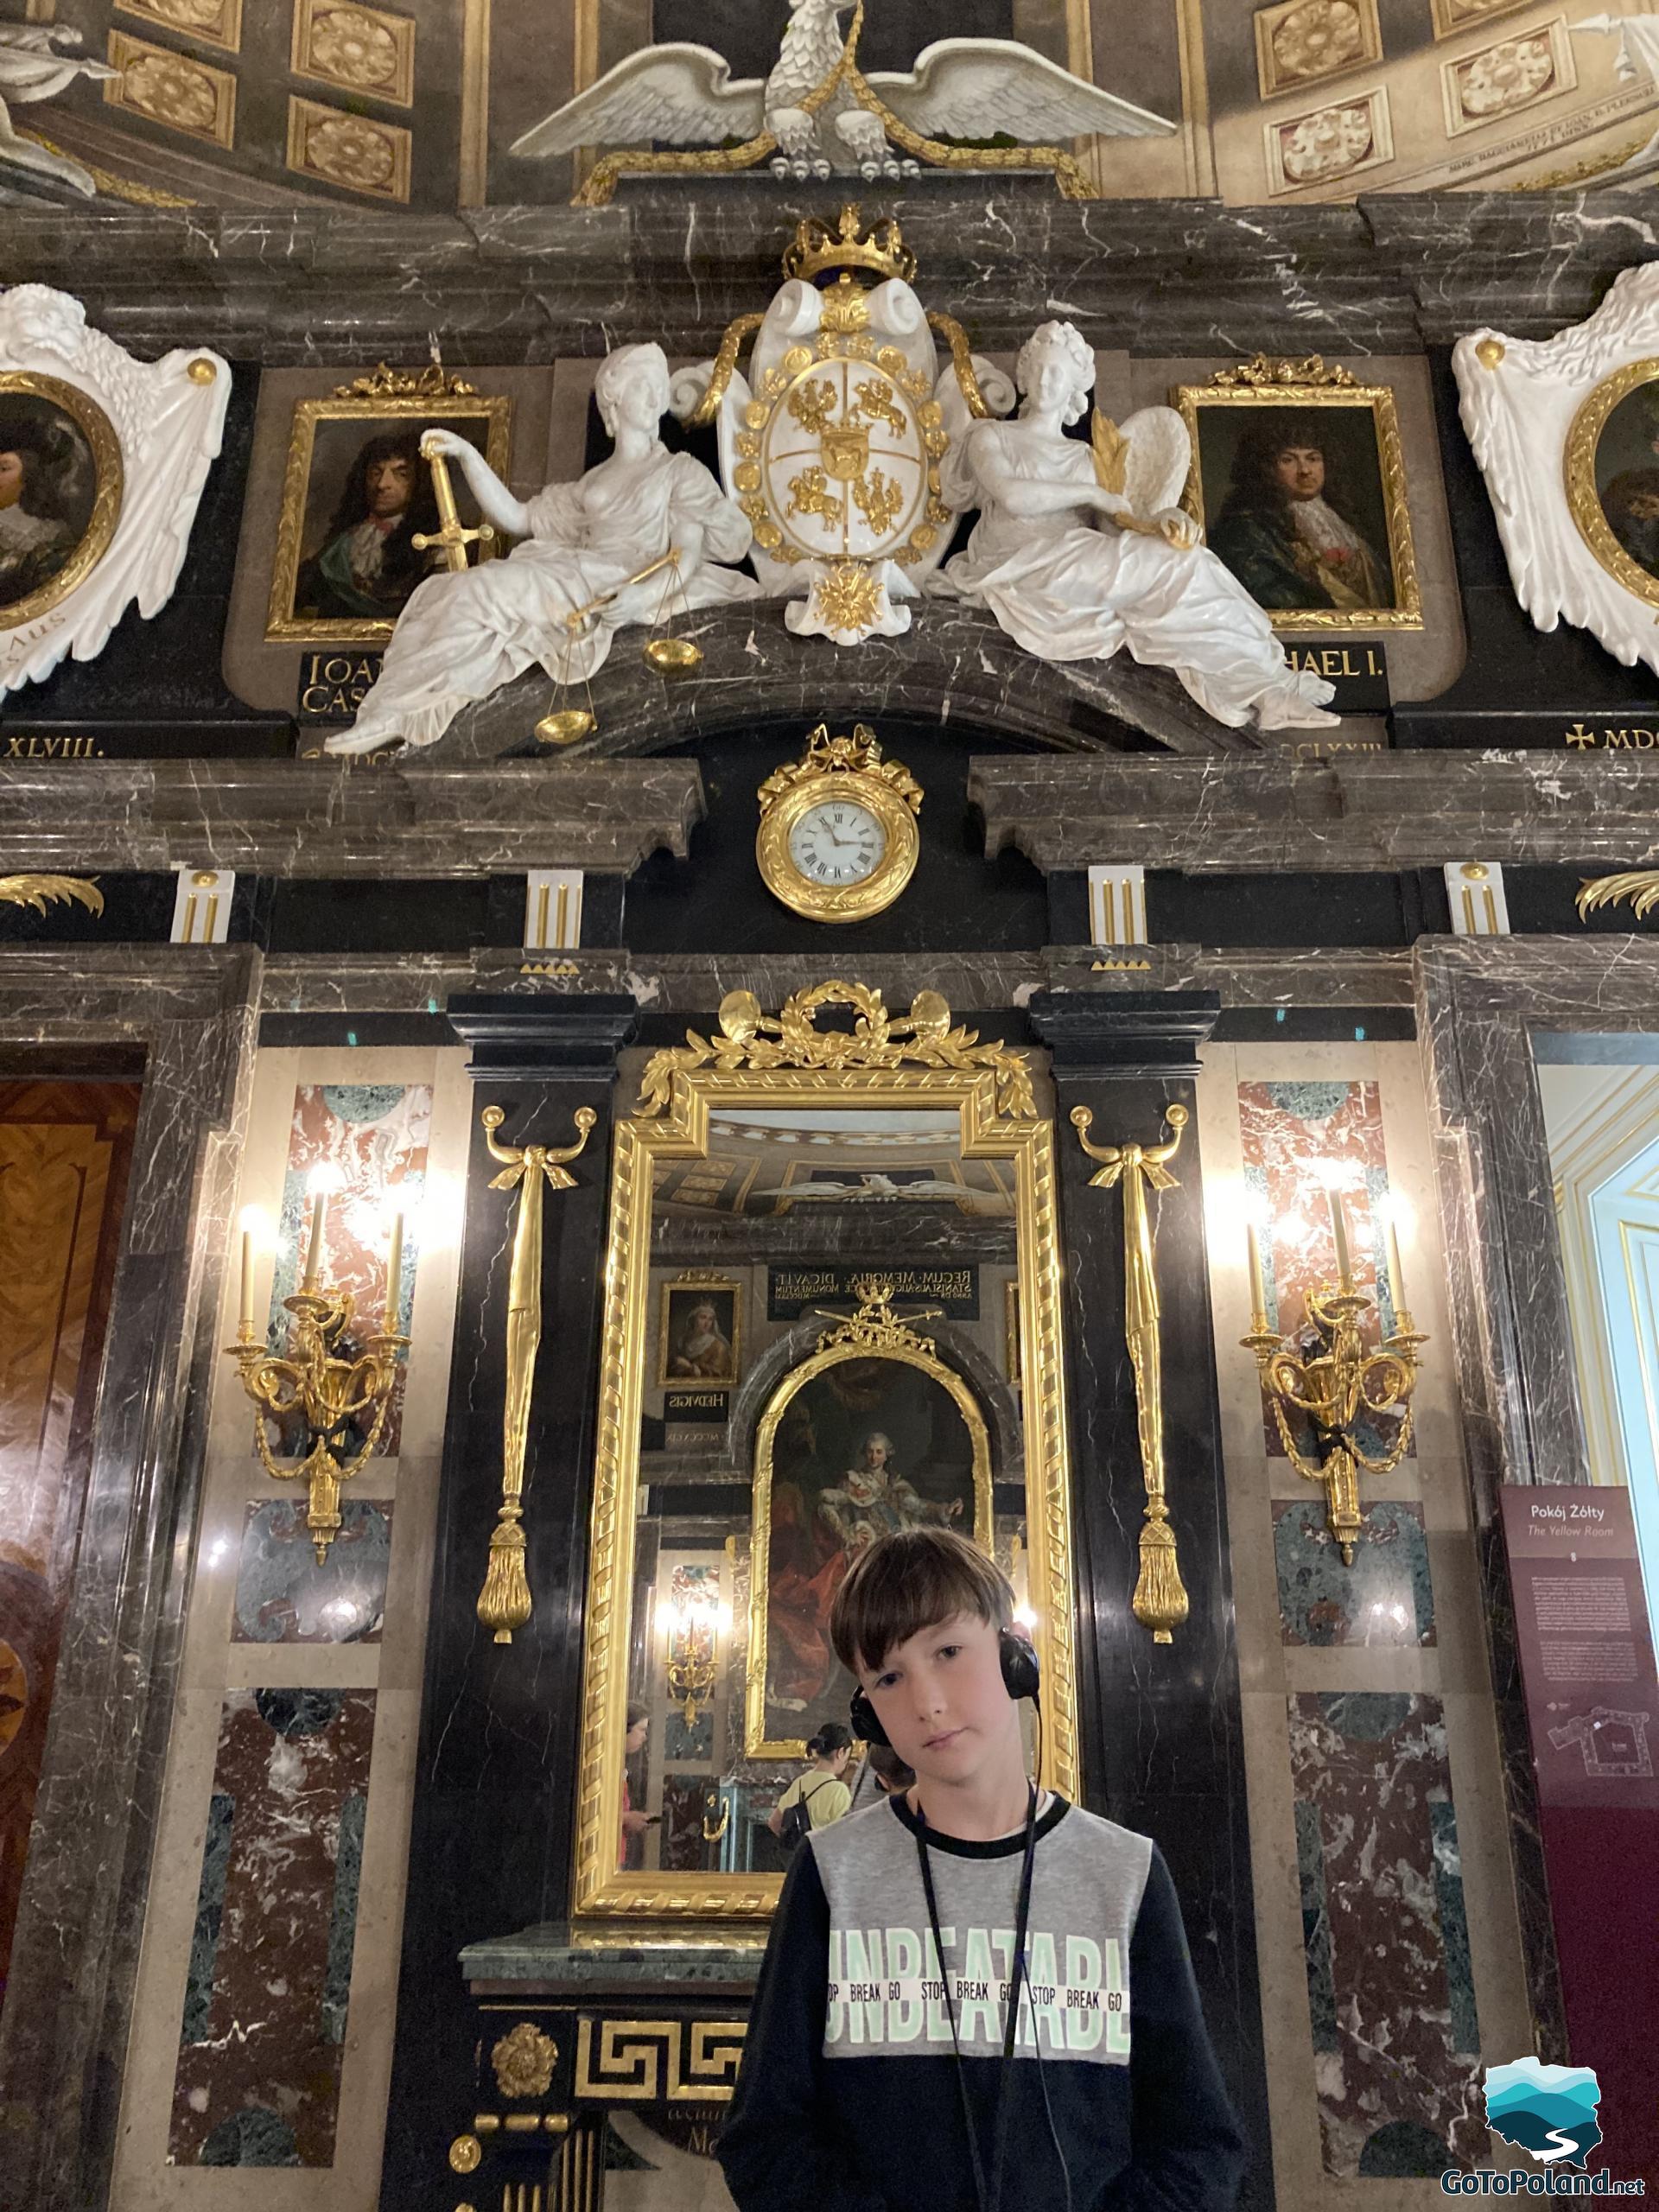 the boy is standing in a richly decorated room, there is a mirror behind it, white sculptures above the mirror, the walls in the room are made of marble